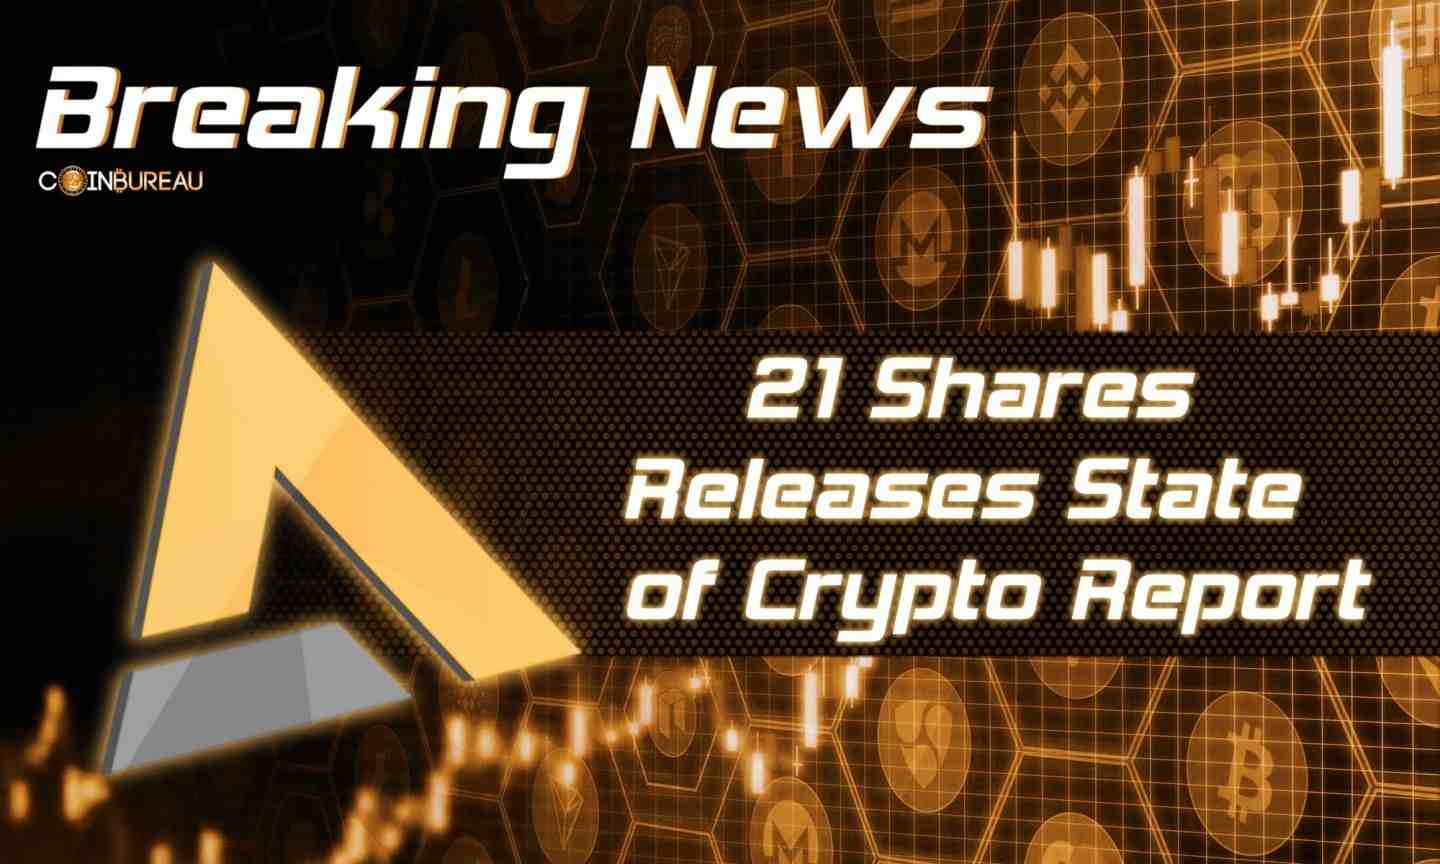 21Shares Releases Sixth State of Crypto Report: Summary